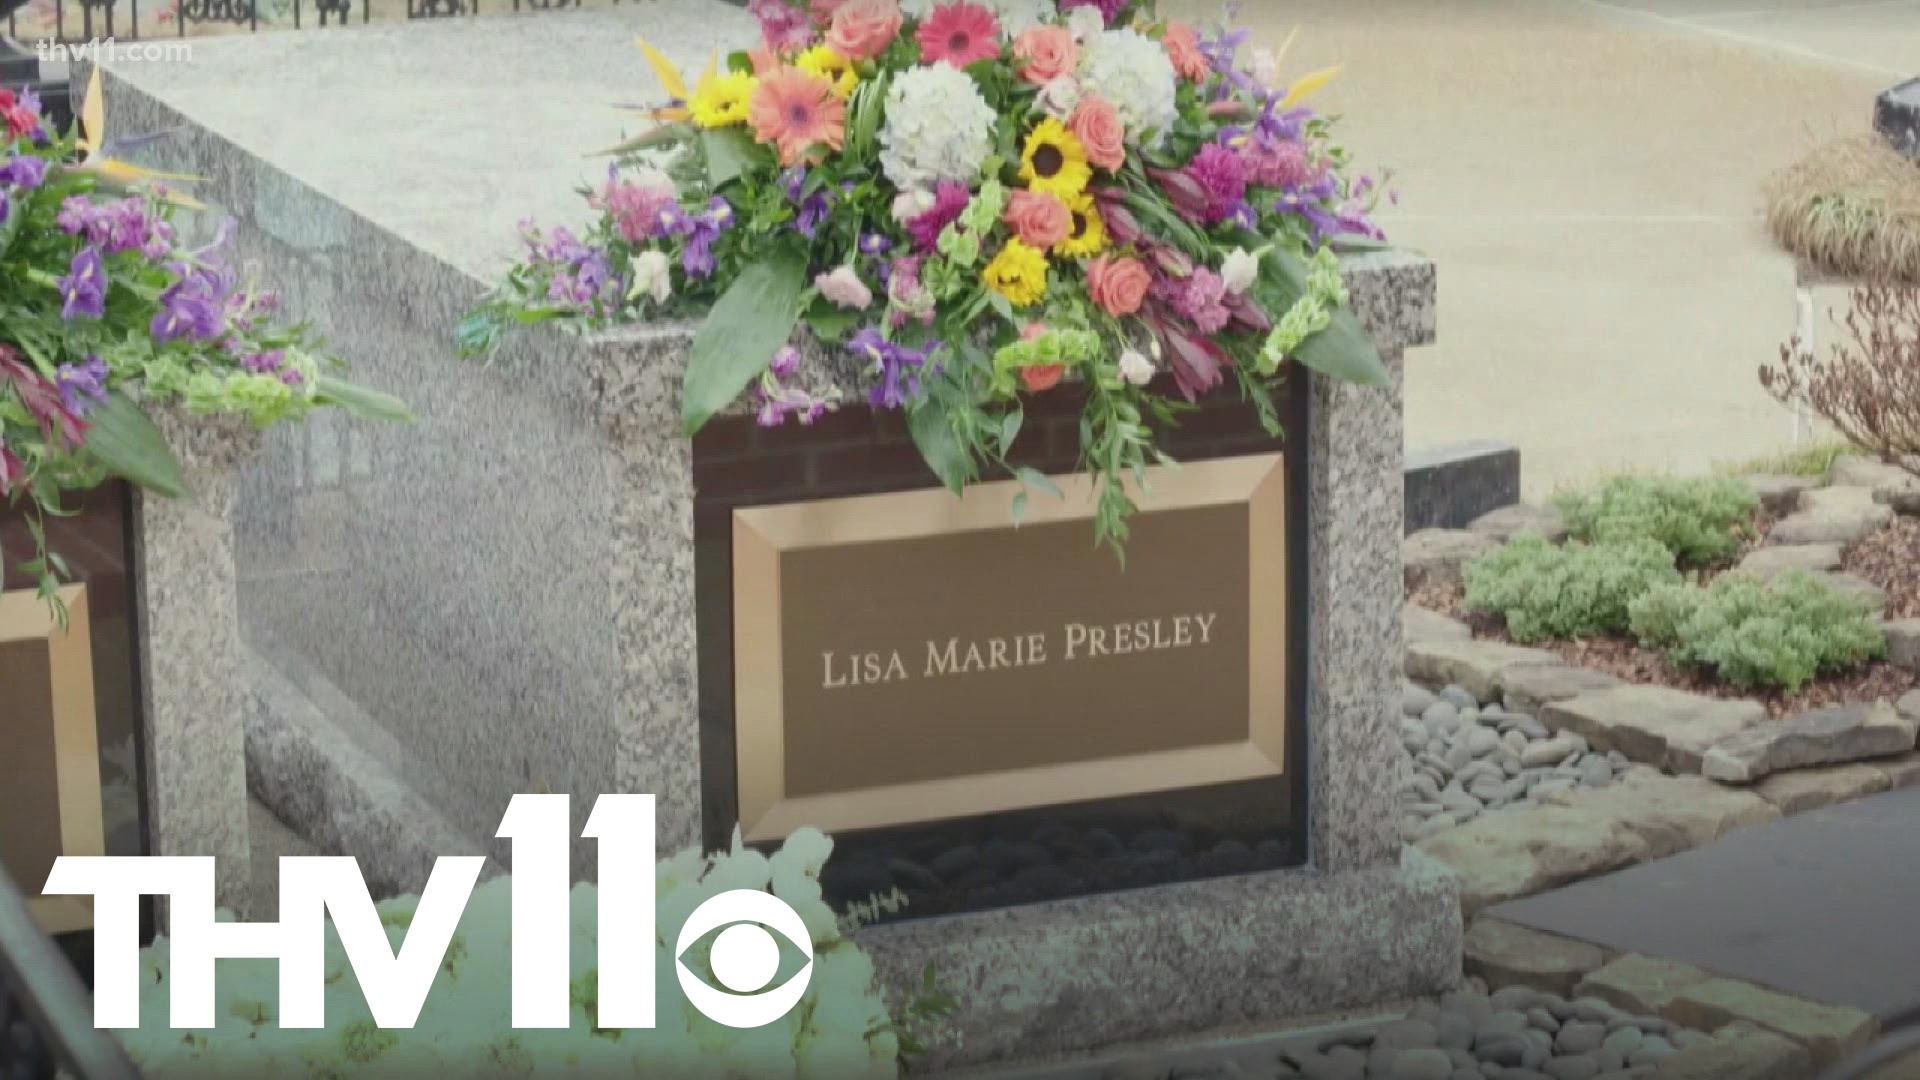 Lisa Marie Presley was laid to rest at Graceland on Sunday as hundreds of fans gathered for a public memorial service on the front lawn.